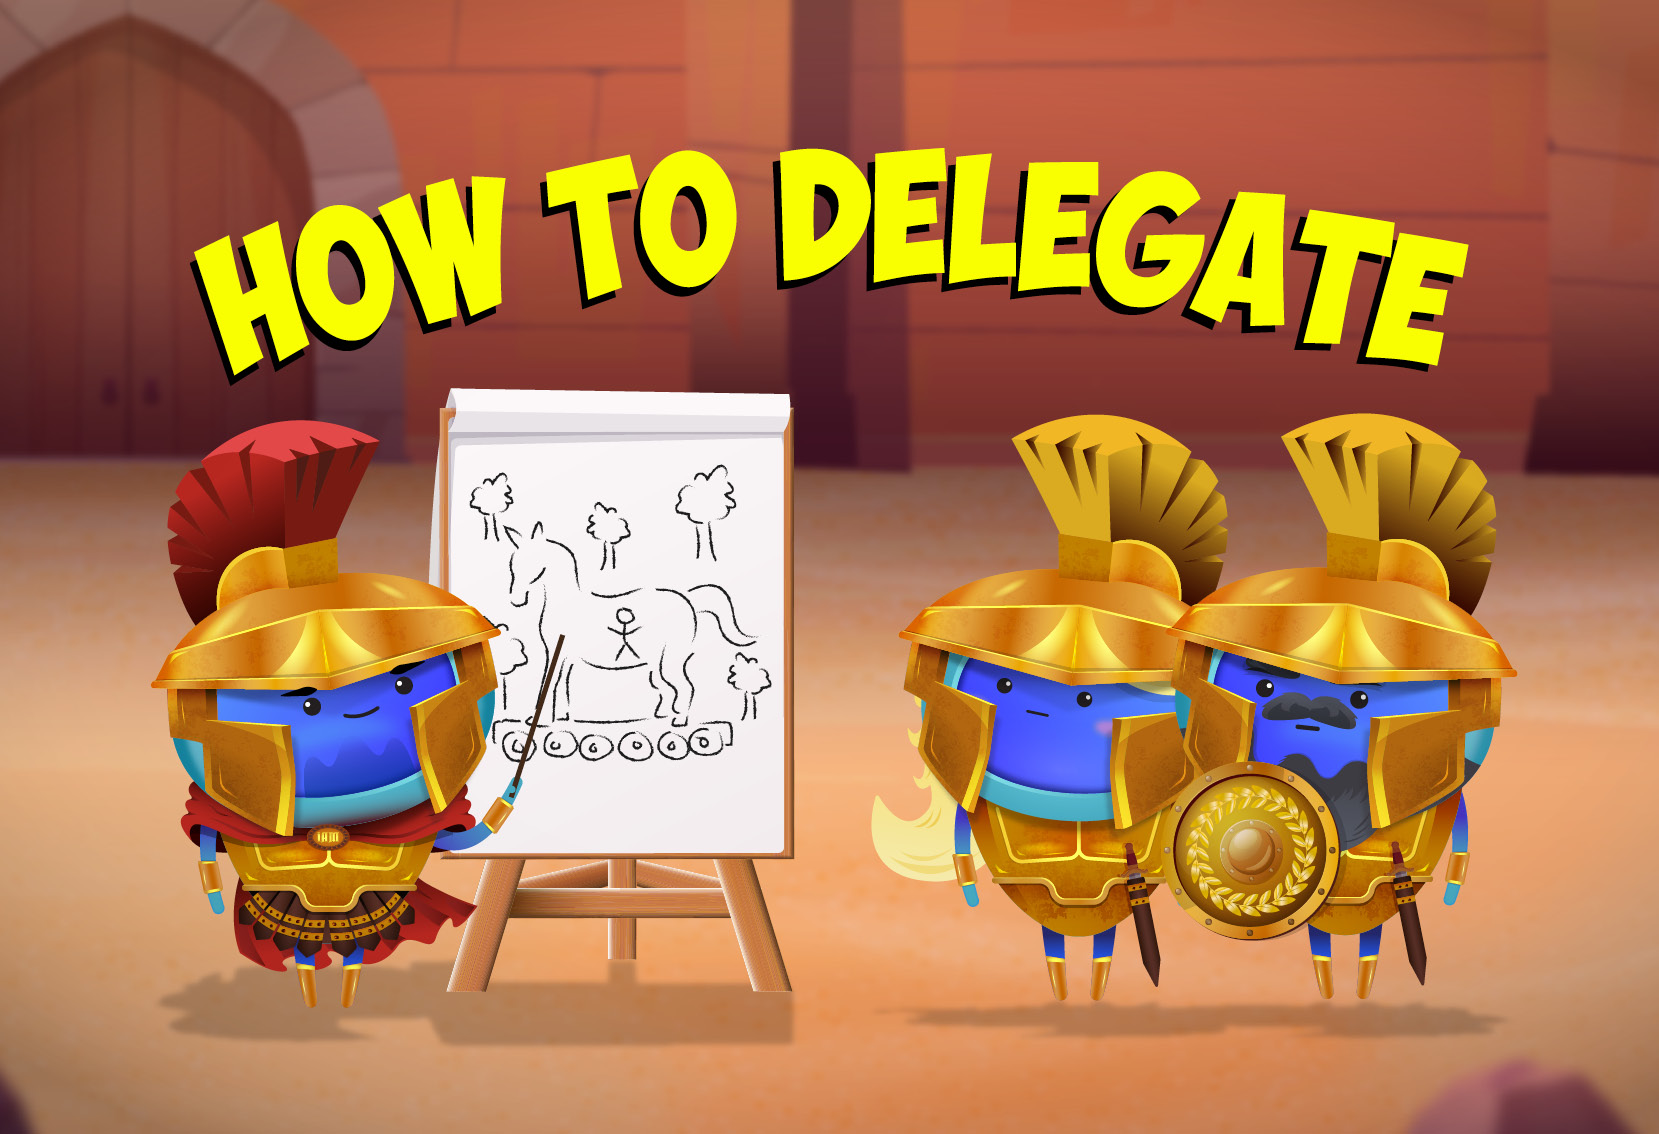 iAM 00281 - How to Delegate - LMS Thumbnails